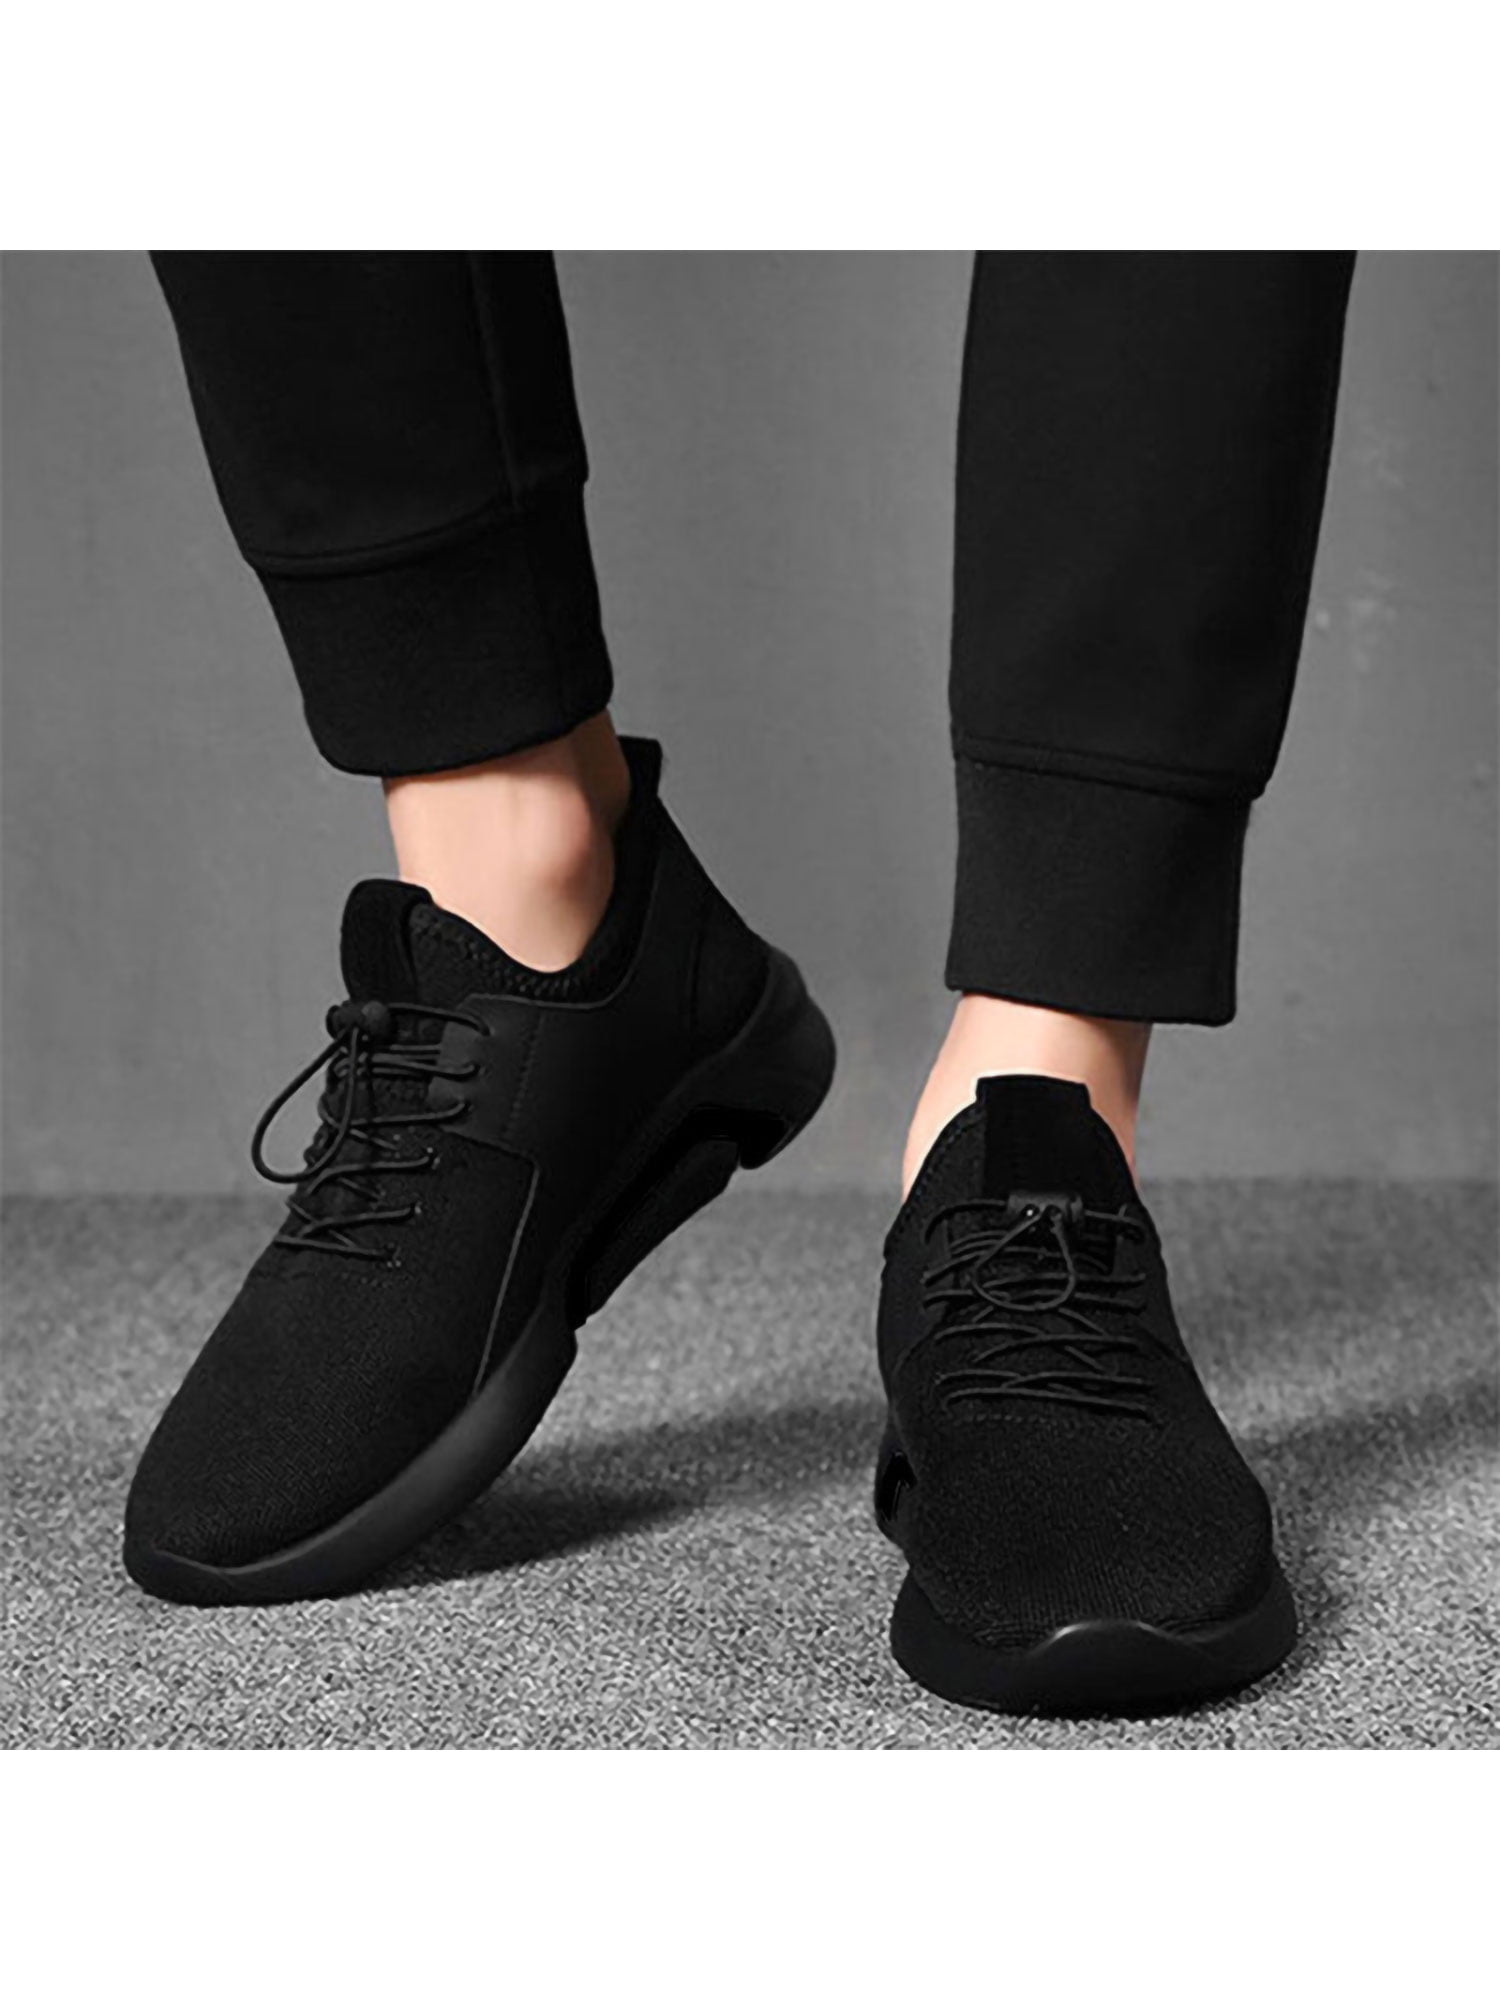 Mens Running Mesh Outdoor Sport Sneakers Lace Up Athletic Casual Comfort Shoes 